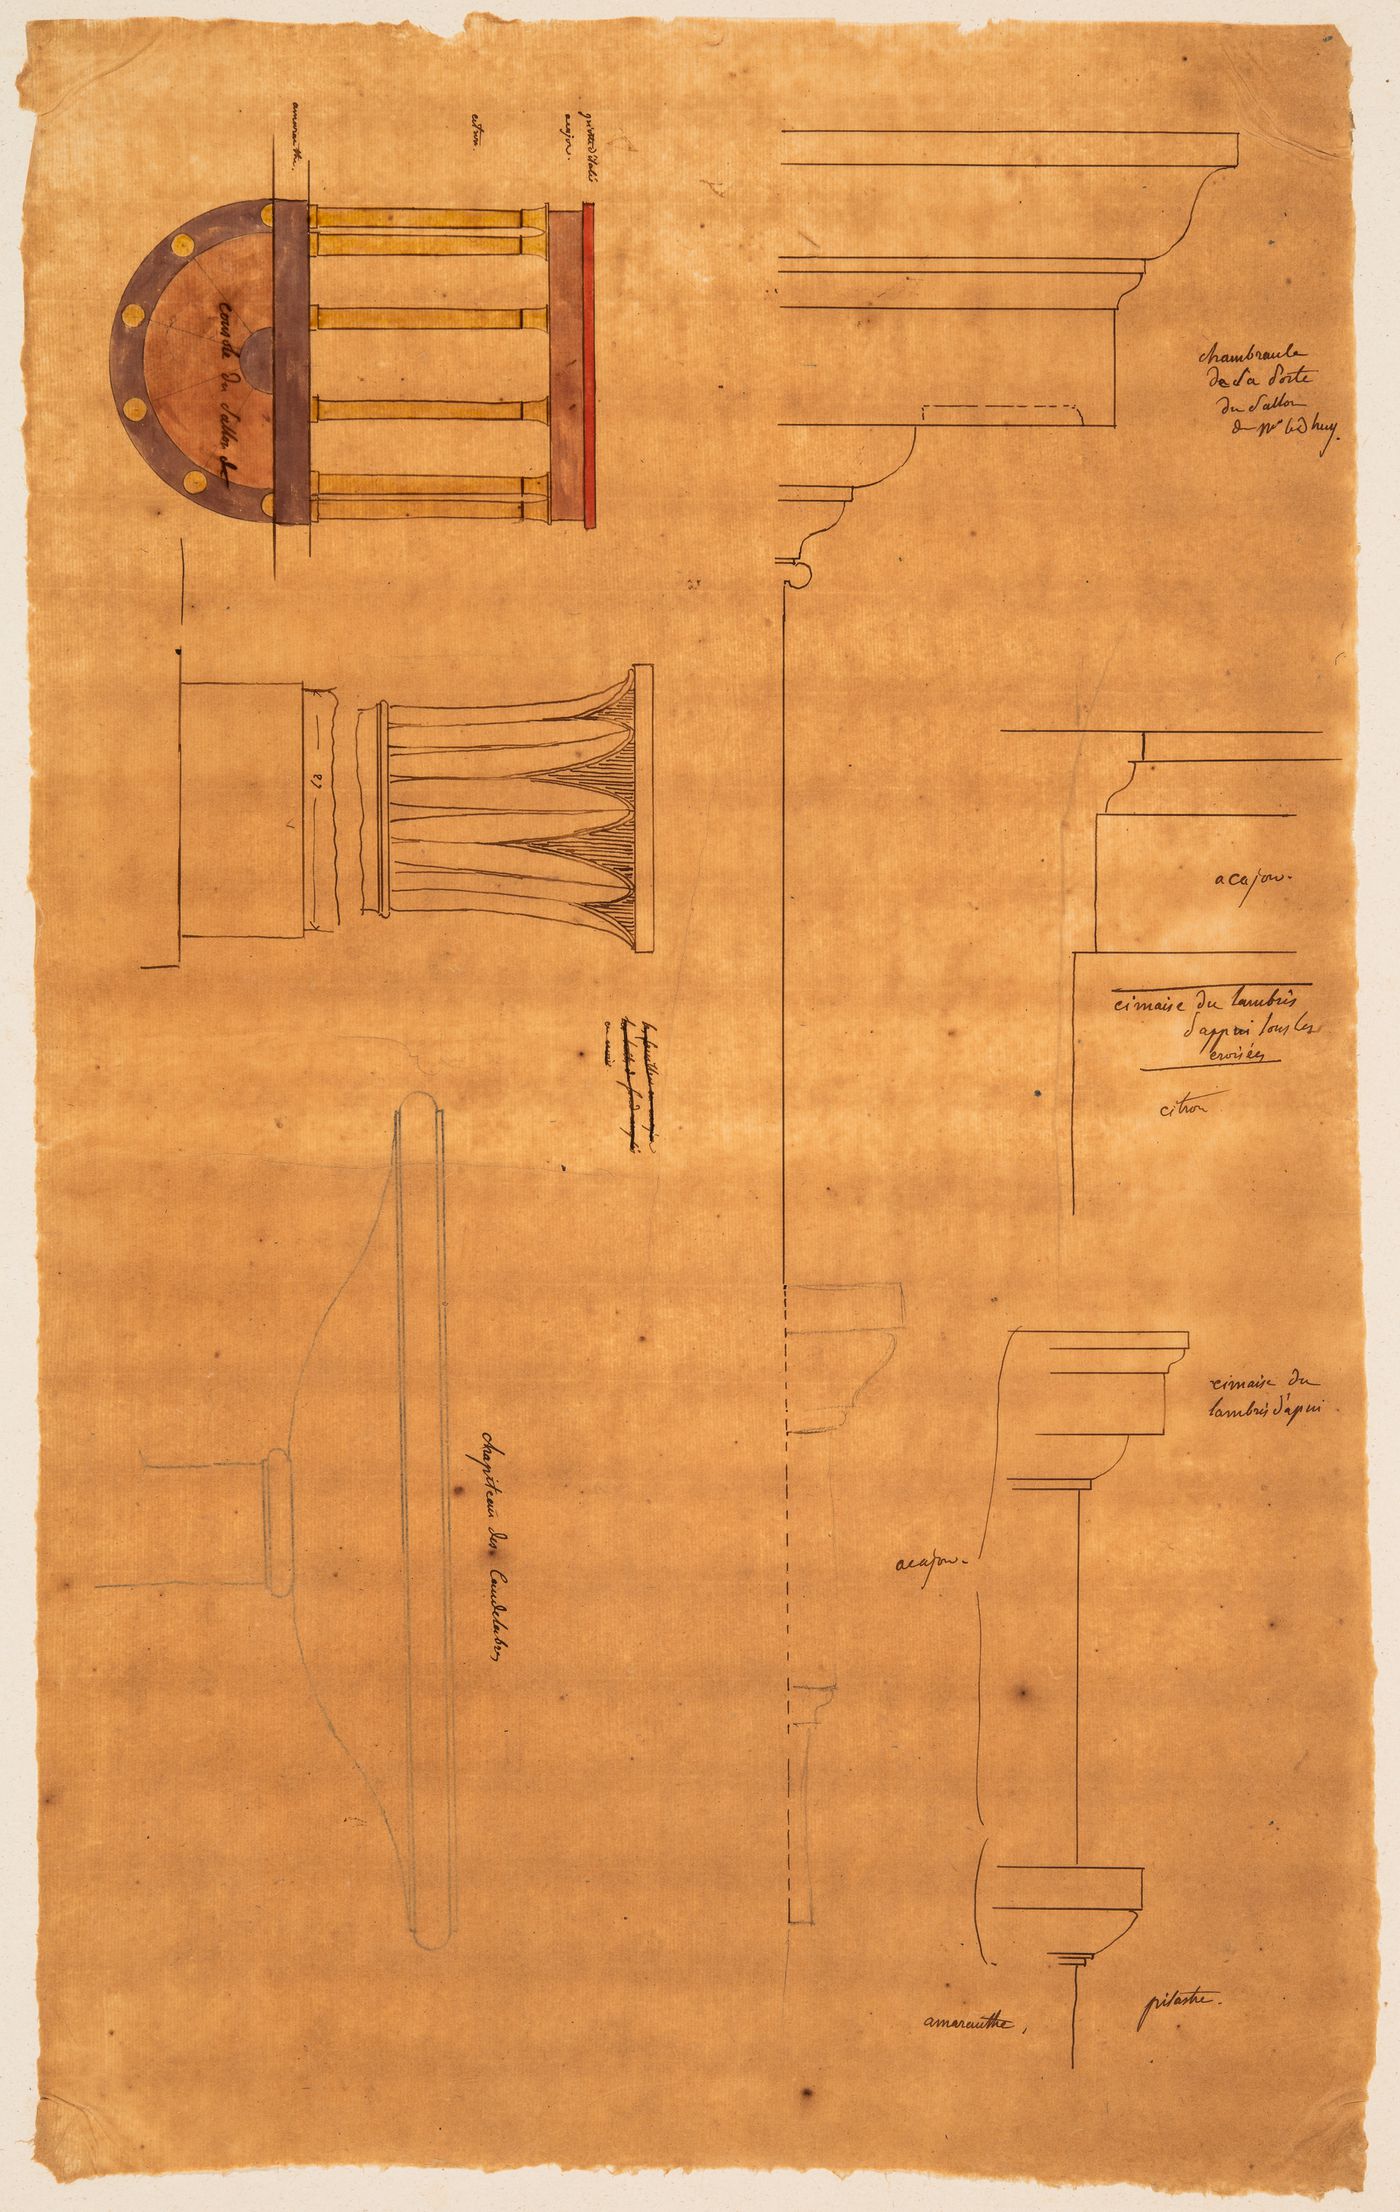 Project for renovations for a house for M. le Dhuy: Details for mouldings, columns, and cornices, and an elevation and half plan for a console table for the salon